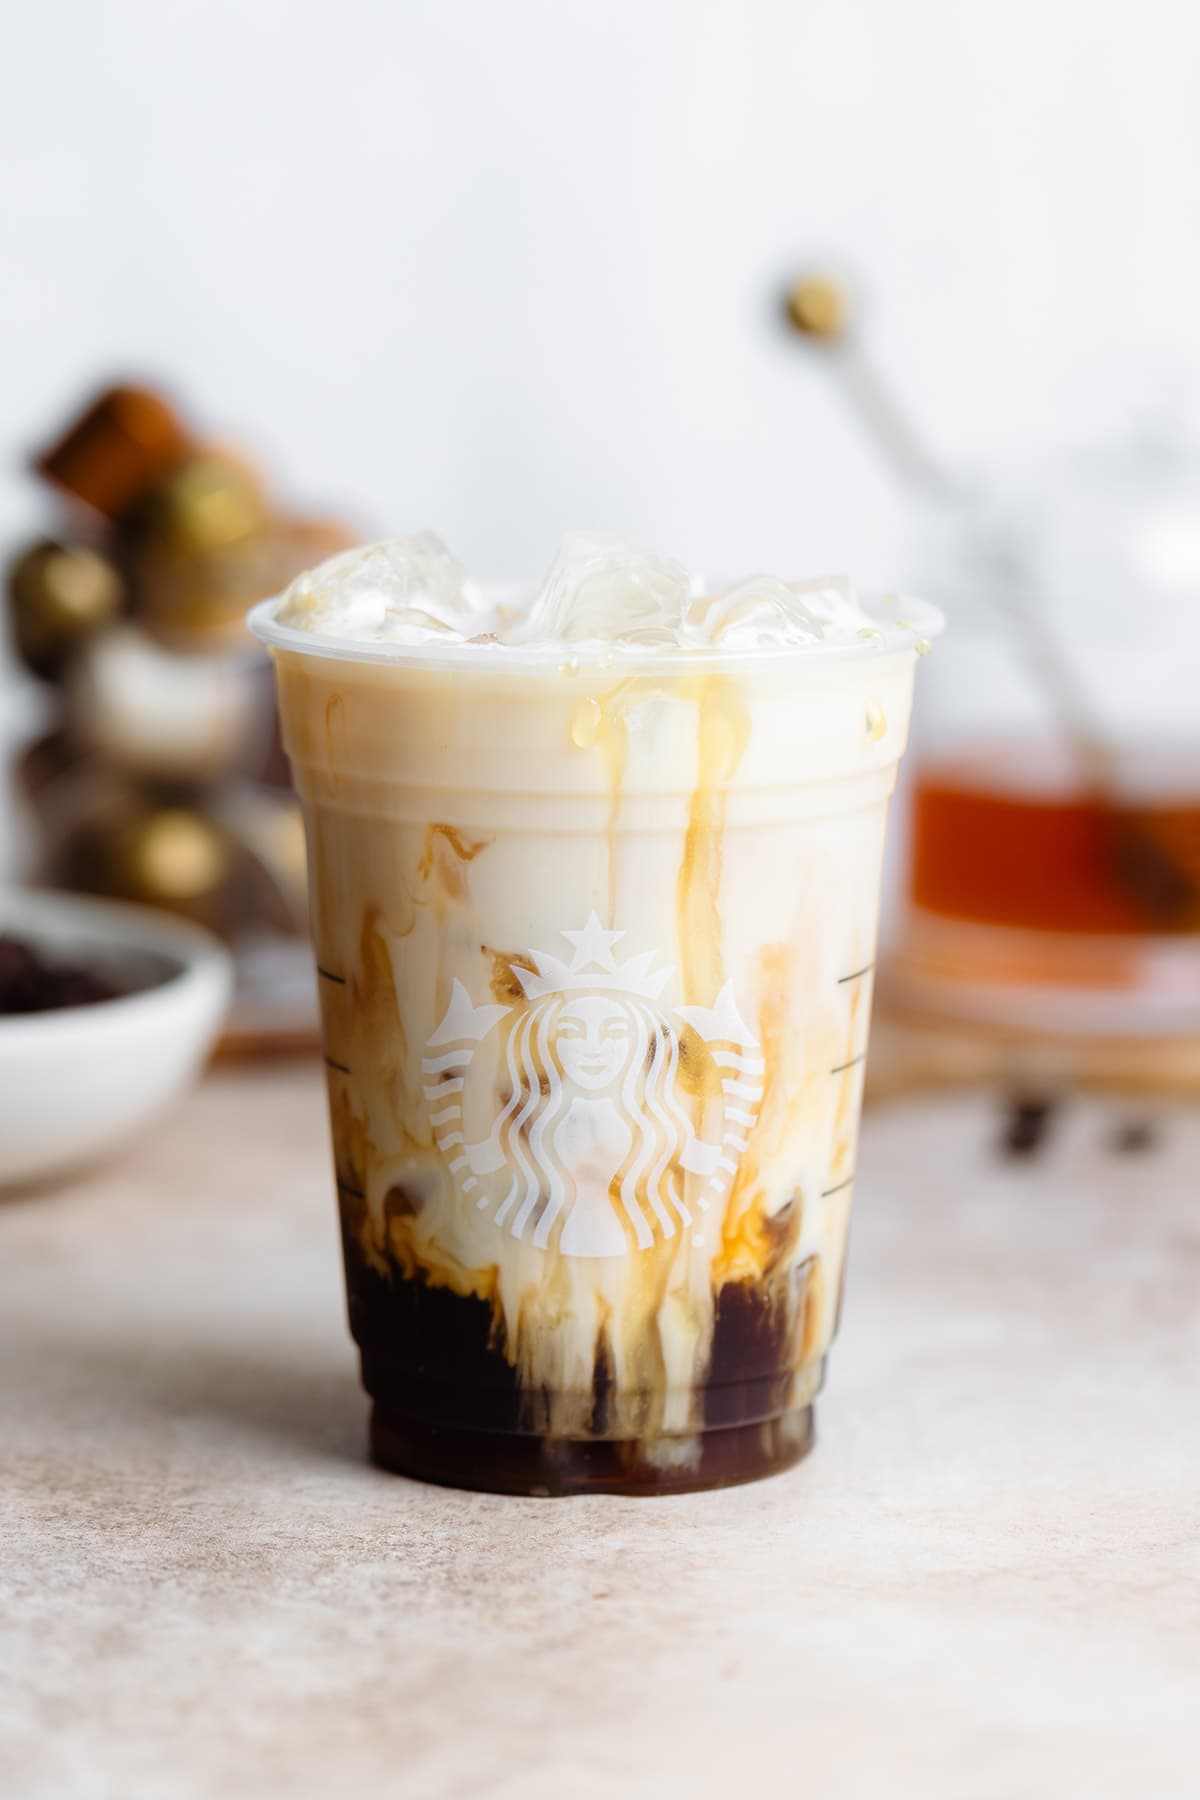 Almond milk slowly mixing into iced espresso in a plastic Starbucks cup.